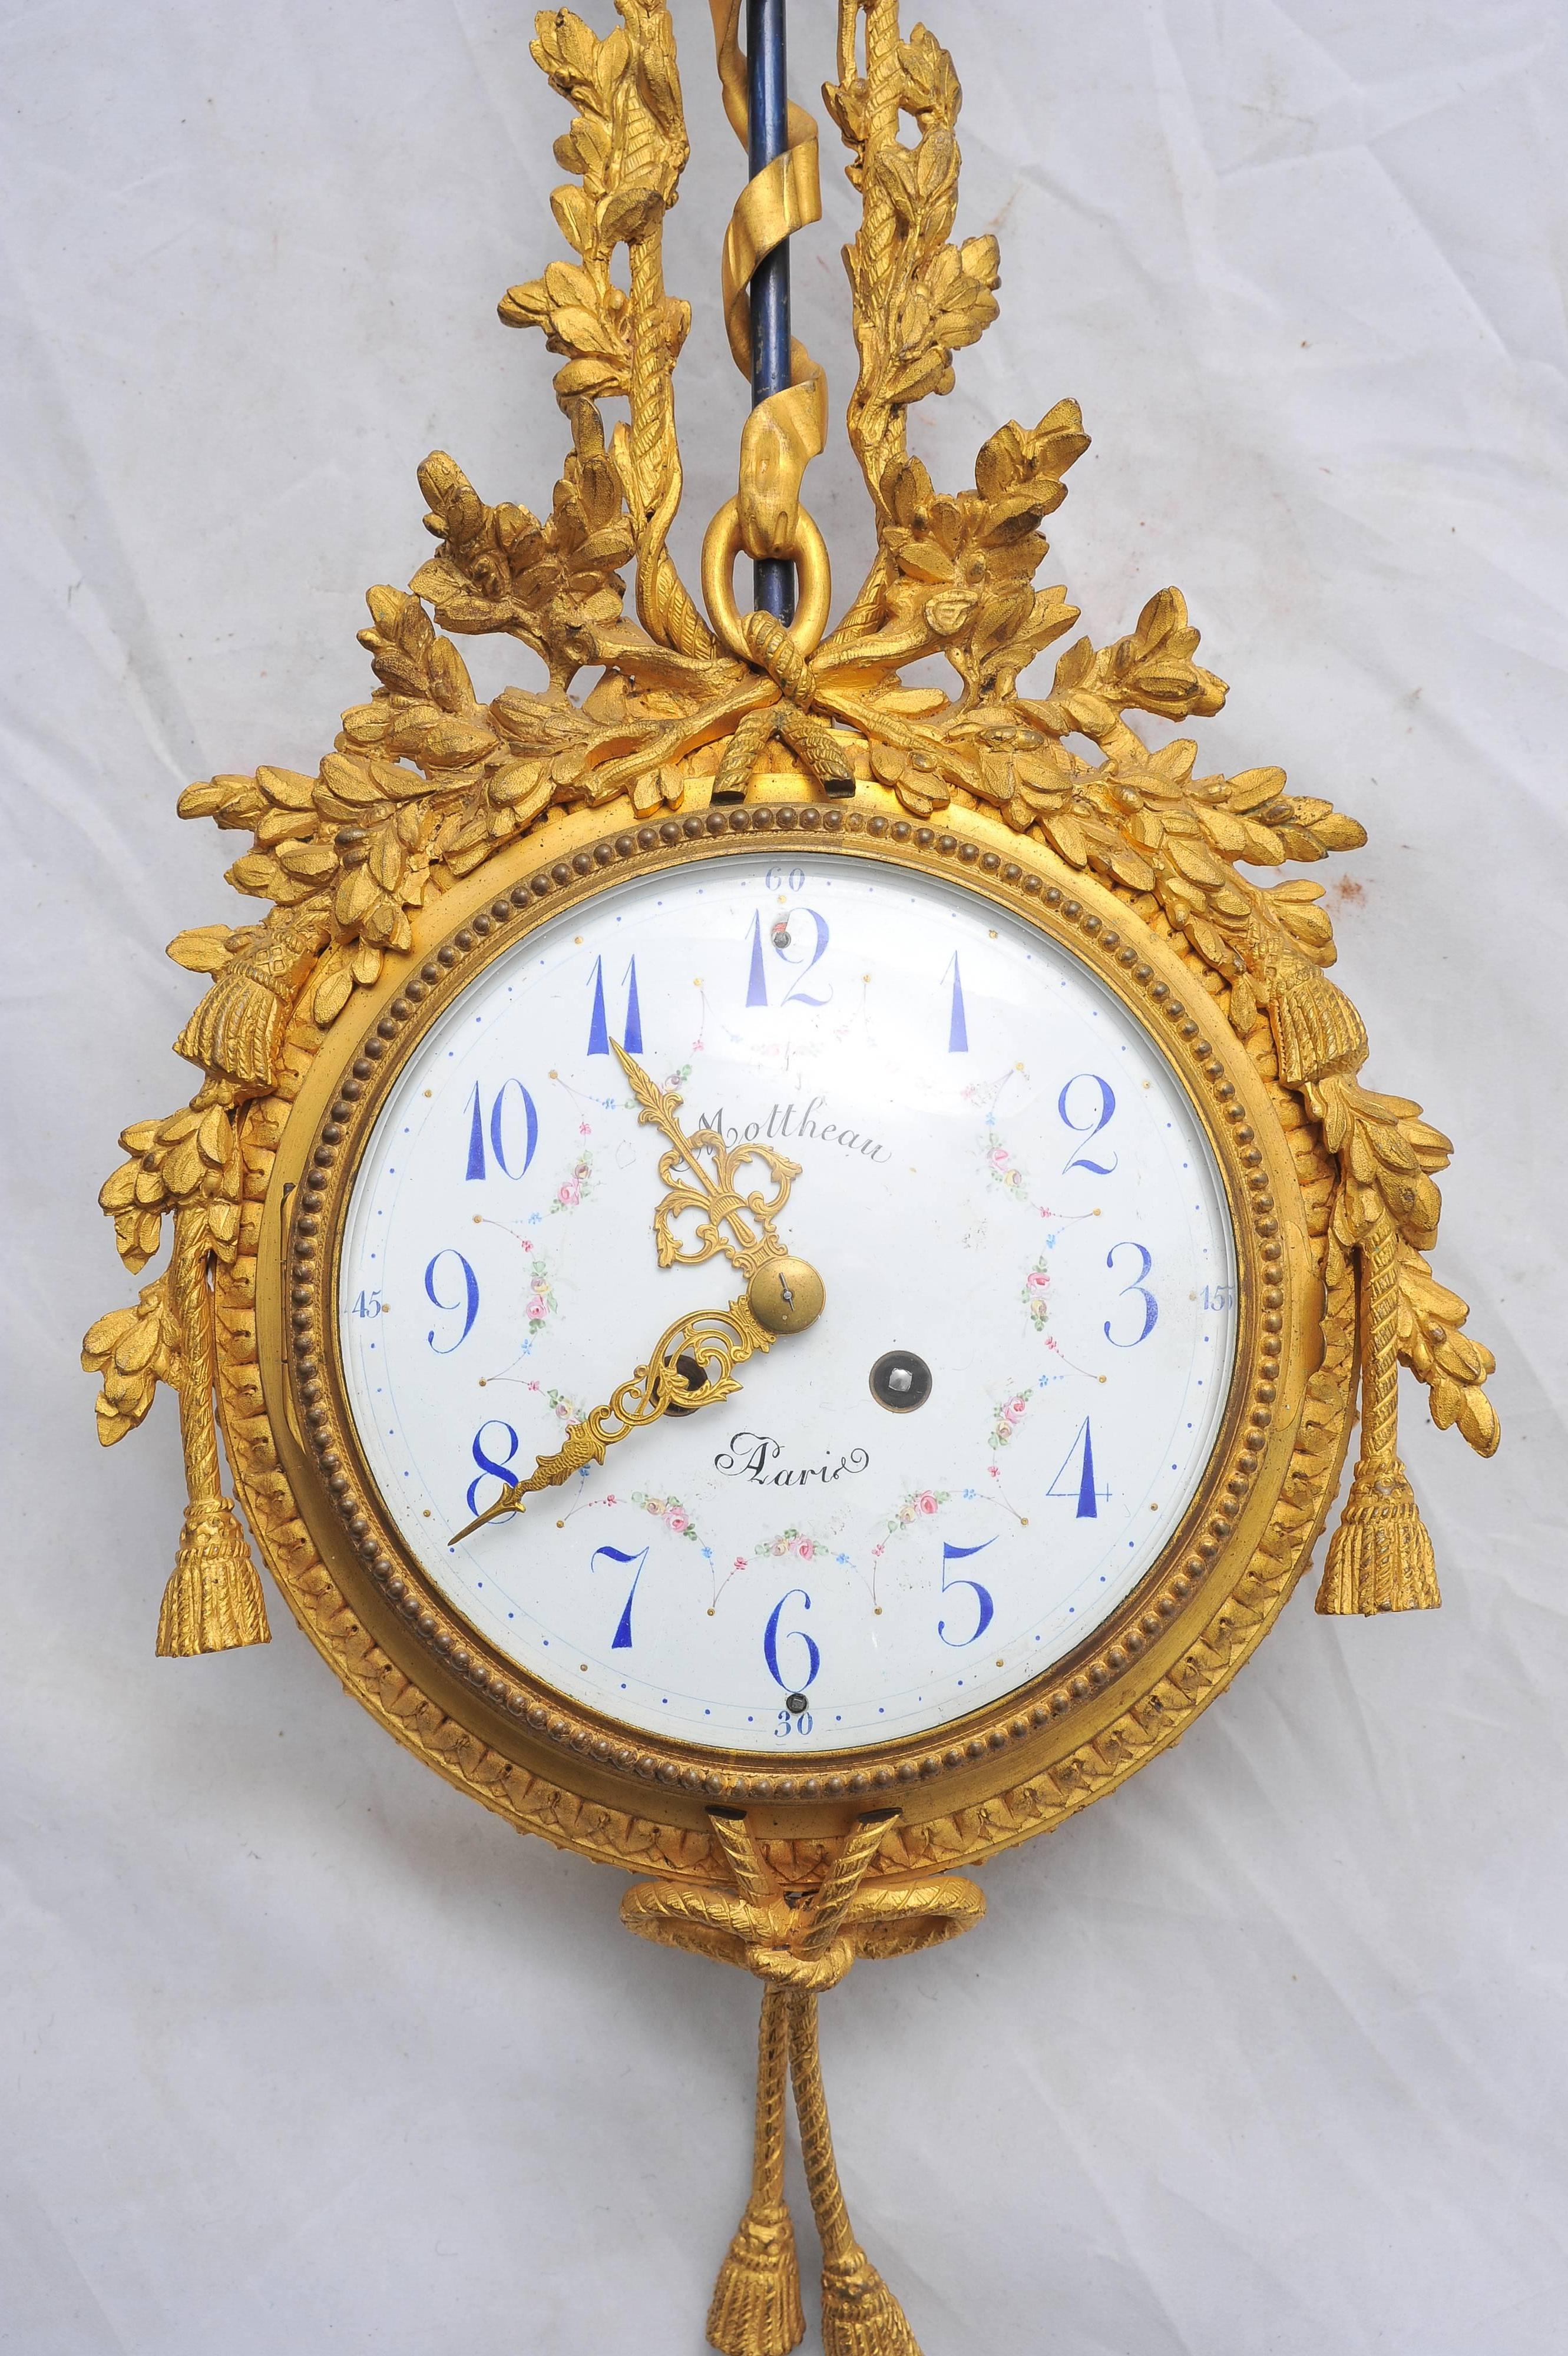 A very pleasing late 19th century gilded ormolu wall clock. Having gilded foliate, ribbon and swag decoration. The white enamel clock face having an eight day chiming movement and signed

Moetheau, Paris.